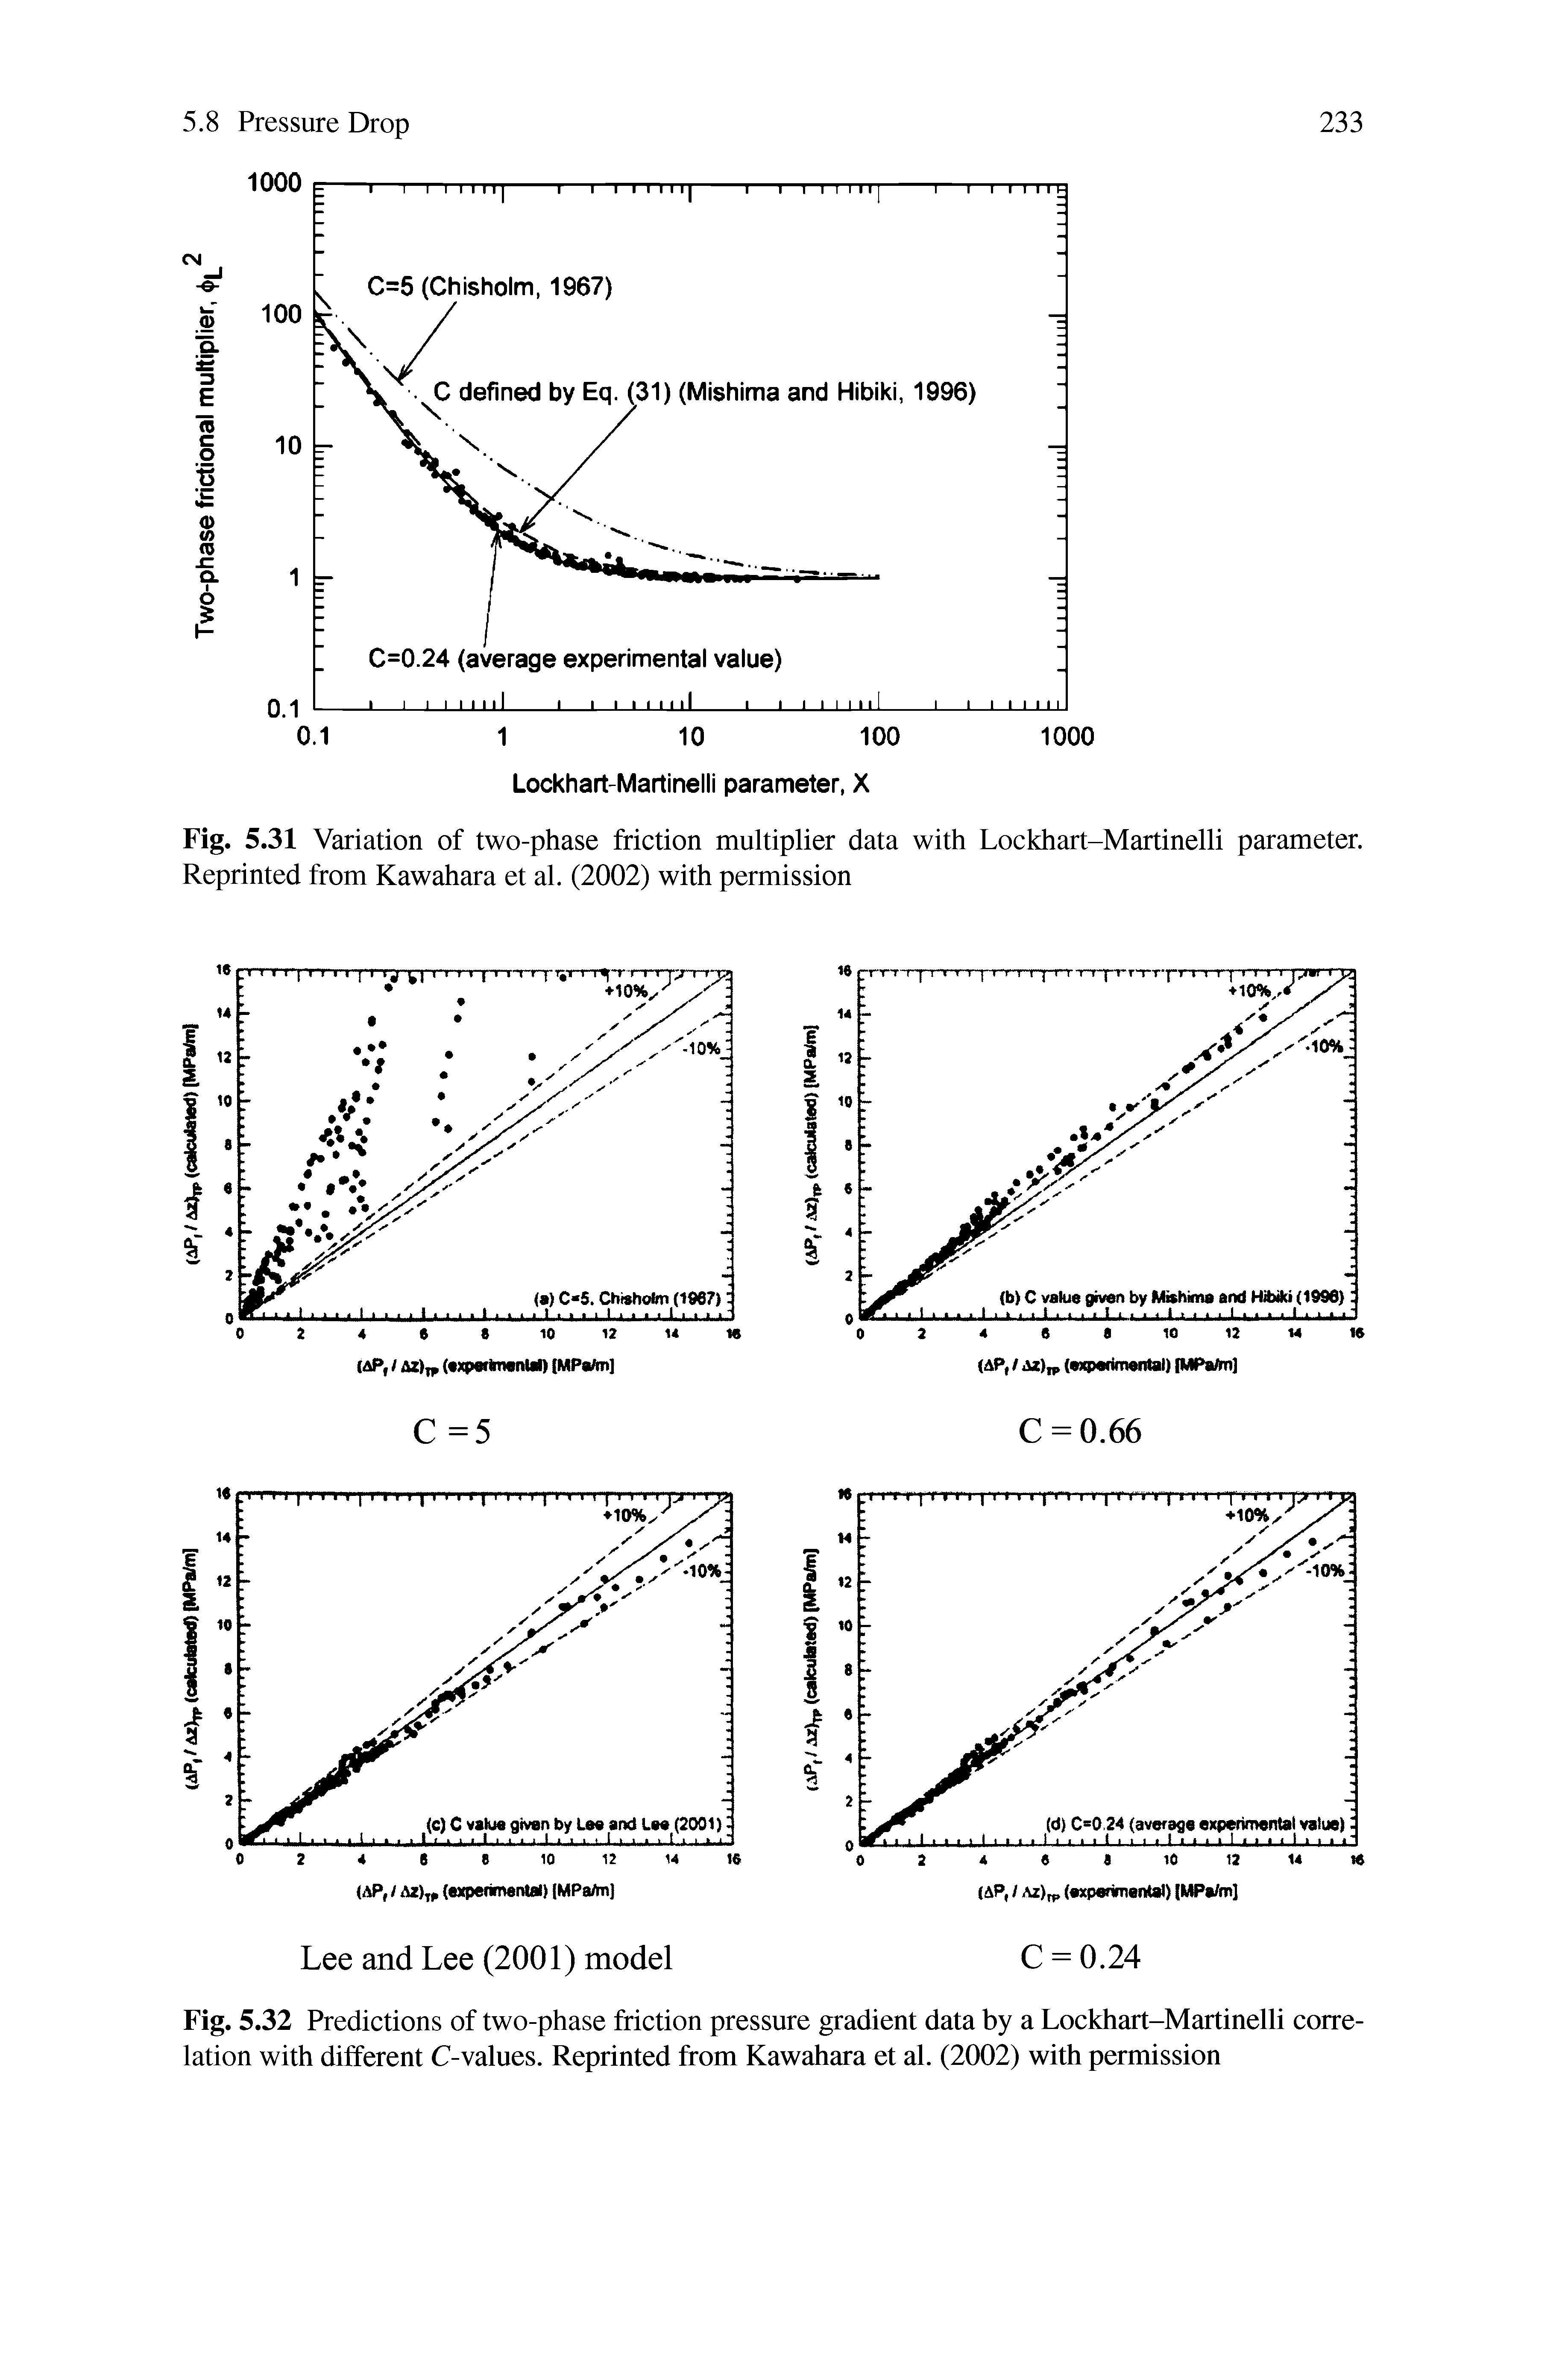 Fig. 5.31 Variation of two-phase friction multiplier data with Lockhart-Martinelli parameter. Reprinted from Kawahara et al. (2002) with permission...